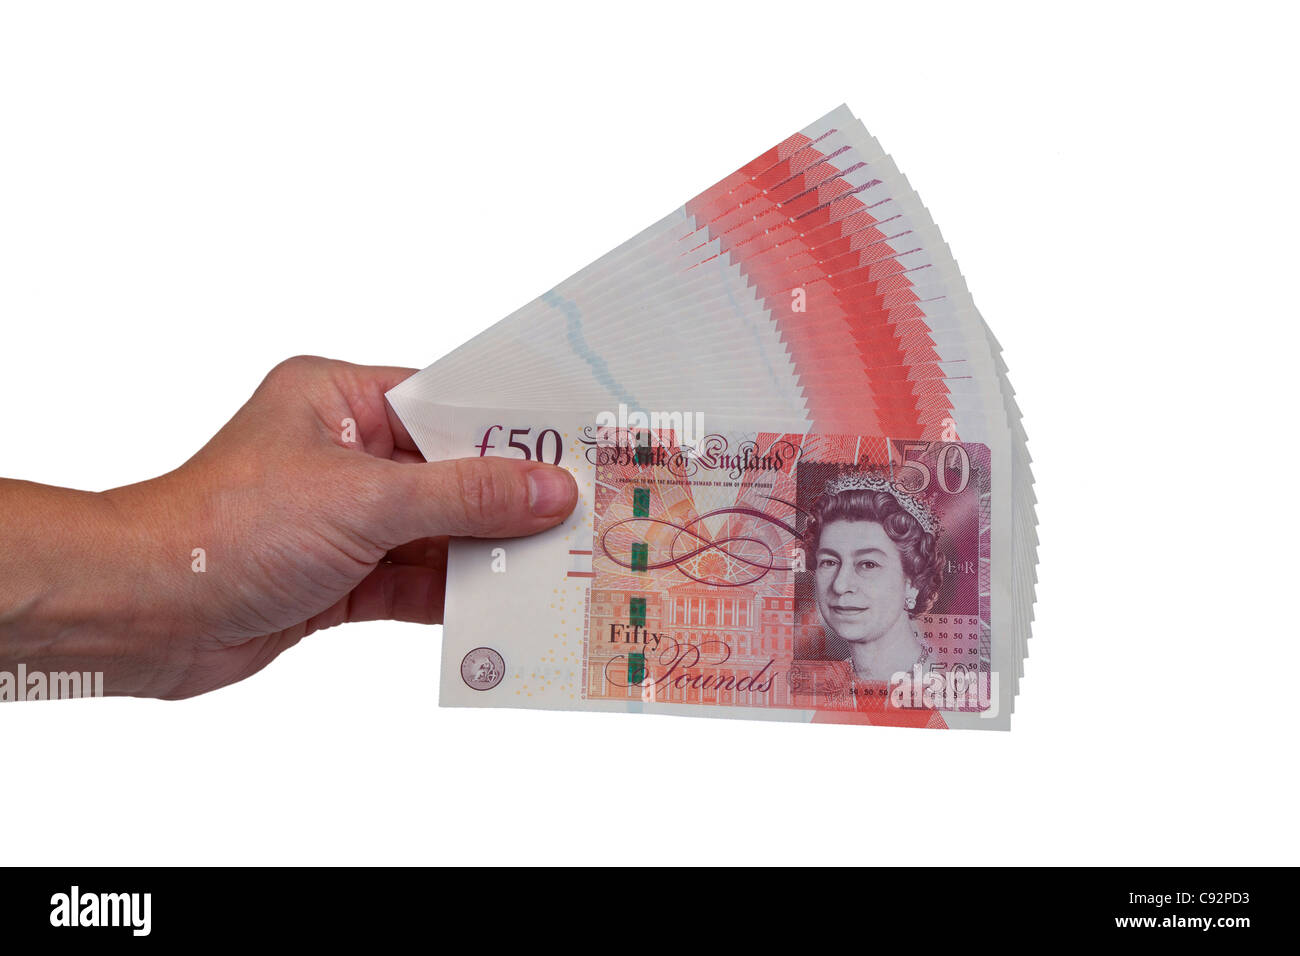 50 pound British currency bank notes £50 cash held in male hand Stock Photo